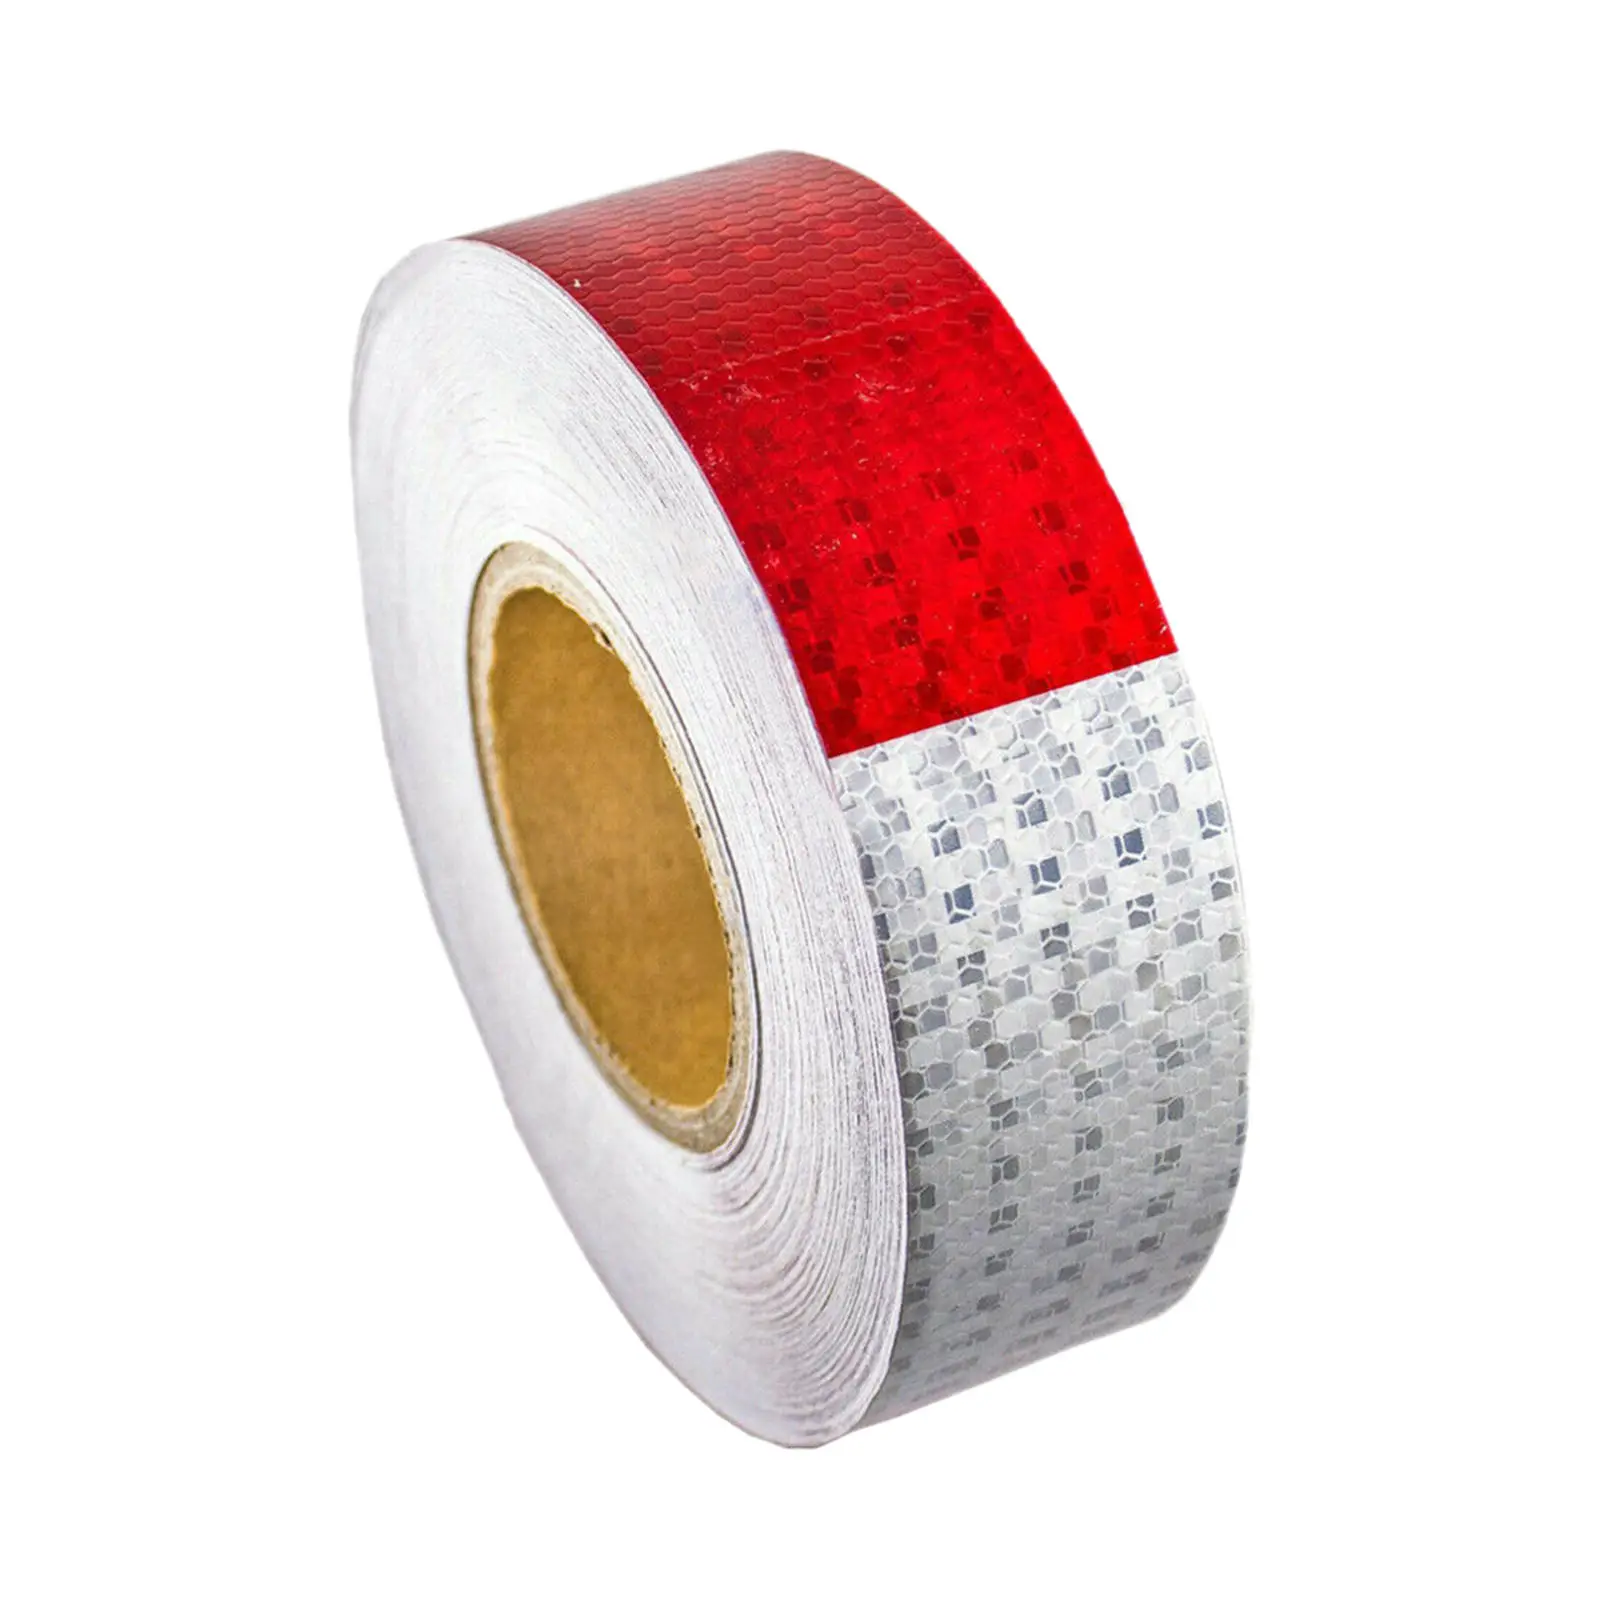 High-Intensity Reflective Red and White Self-Adhesive Conspicuity Tape 2 Inch by 150 Foot Roll